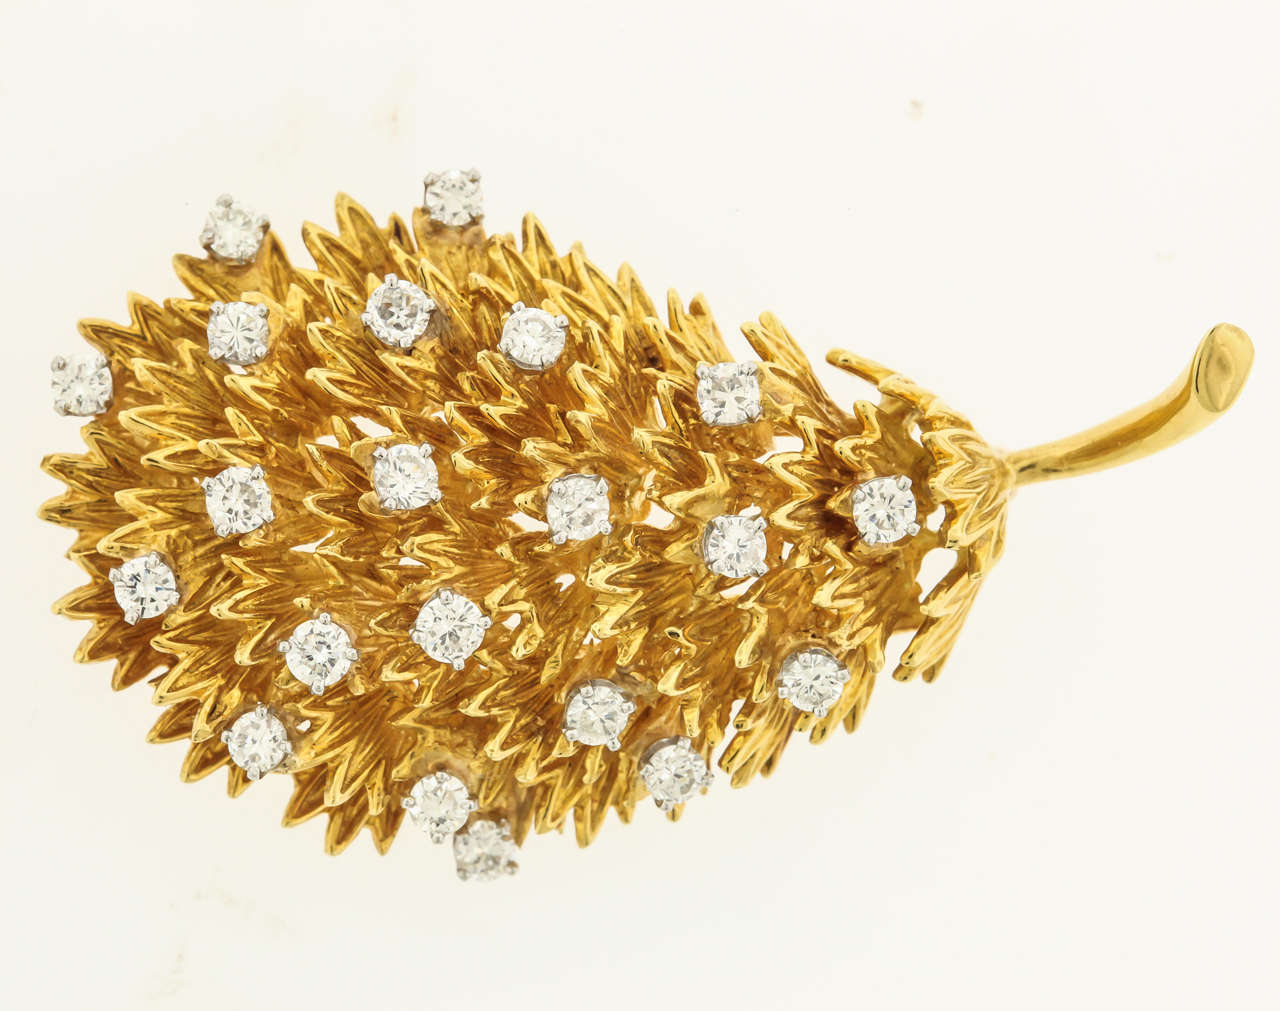 18K yellow gold and diamond brooch is composed of 18K leaves in a three-dimensional pin studded with 21 full-cut diamonds, approx. 2.10 carats. The brooch measures 1-1/4